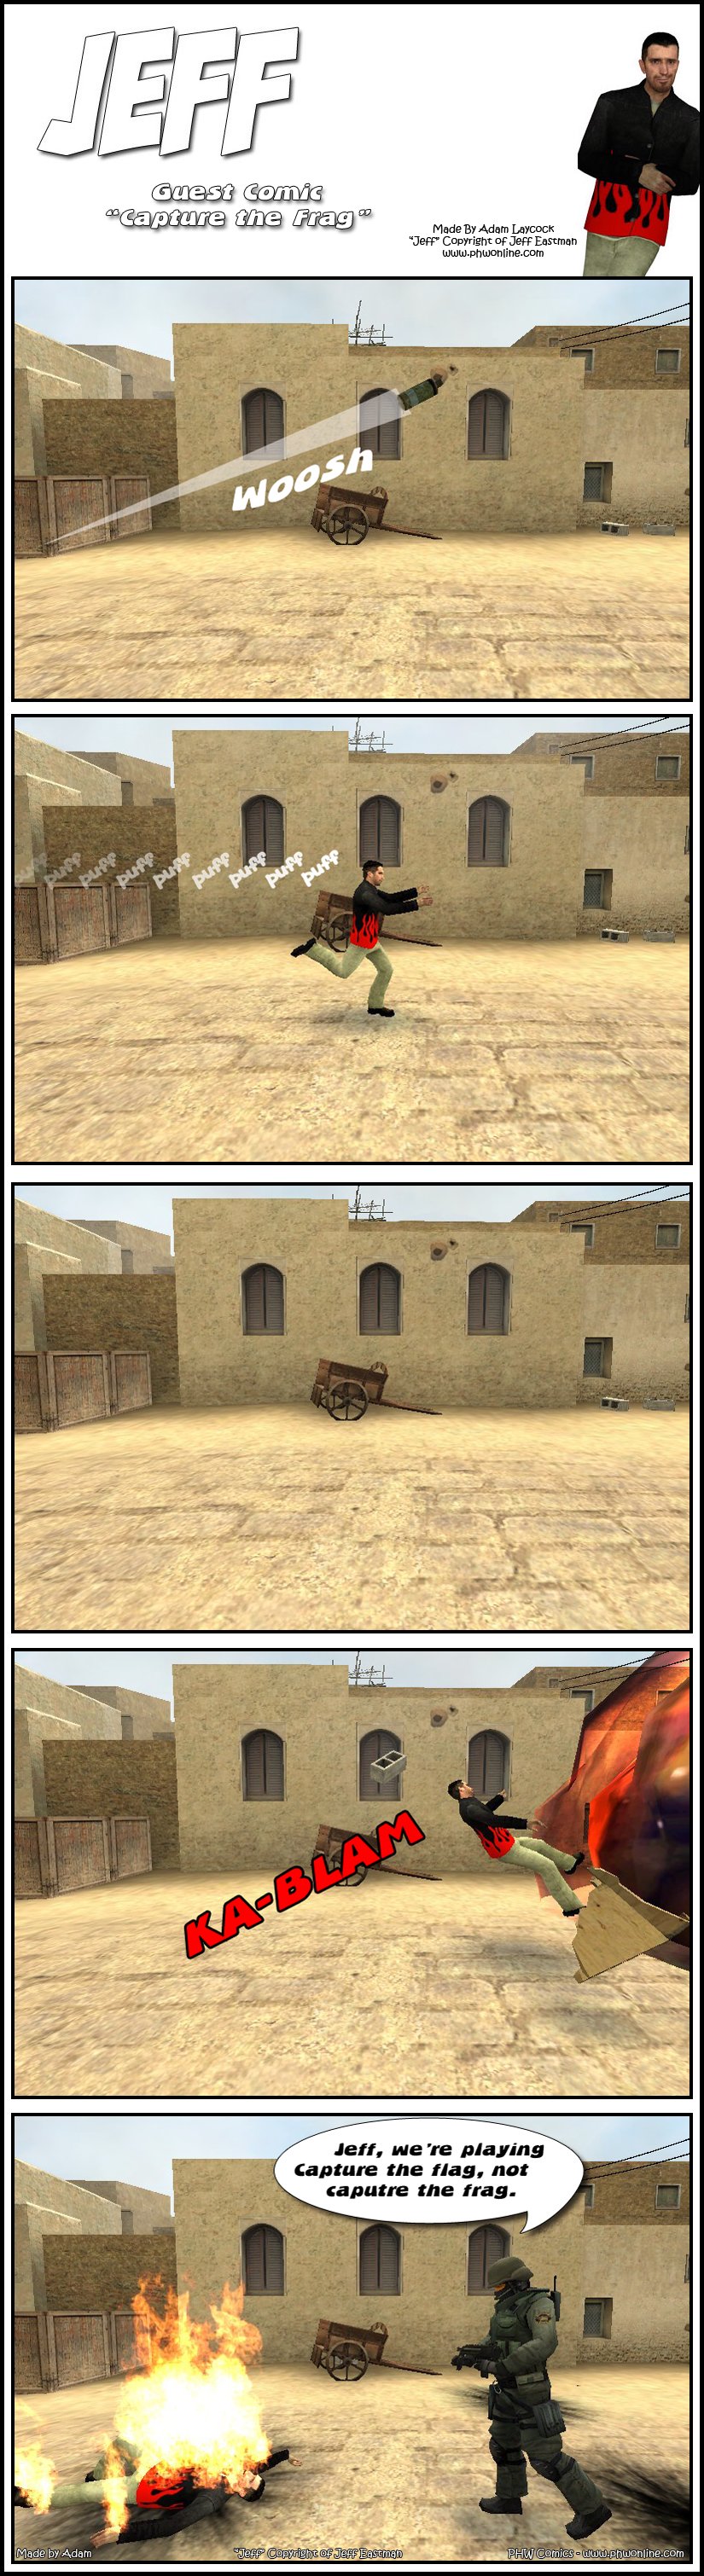 In Counter-Strike's Dust 2 map, someone throws a fragmentation grenade. Suddenly, Jeff rushes by, running after the grenade. A single moment of peace, then the grenade explodes, tossing Jeff back. A counter-terrorist approaches Jeff, who is burning on the ground, and explains to him that they are playing capture the flag, not capture the frag. The end.